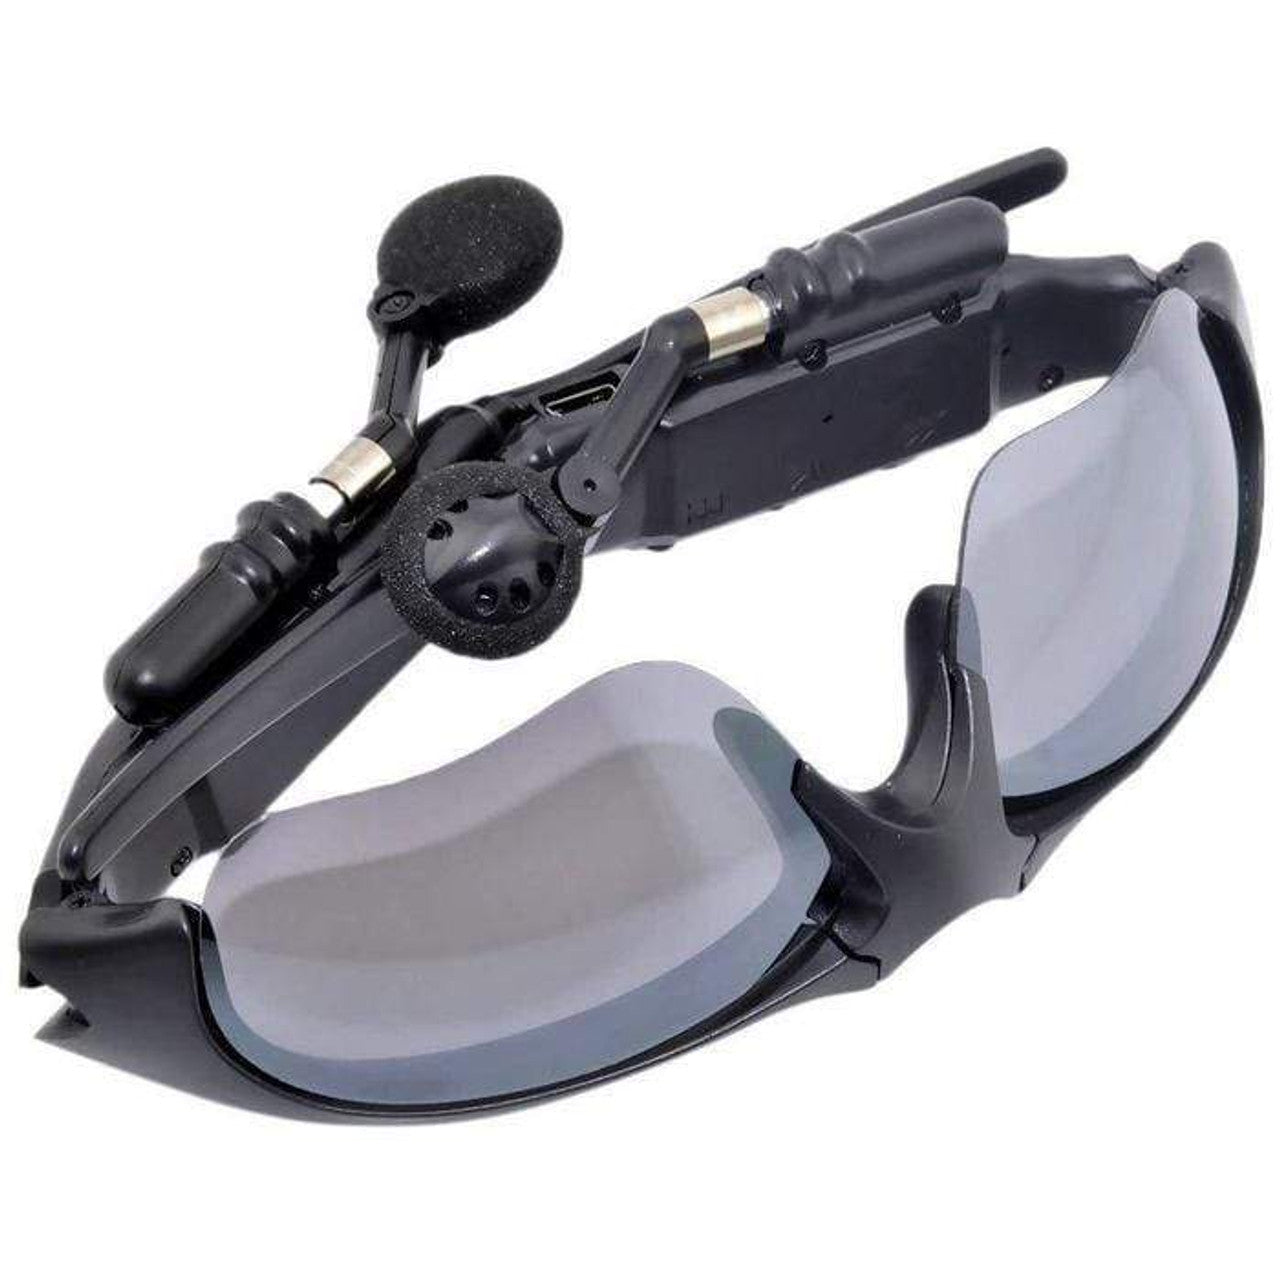 Smart Bluetooth Sunglasses with Wireless Earphones Attached for Hands-Free Calling